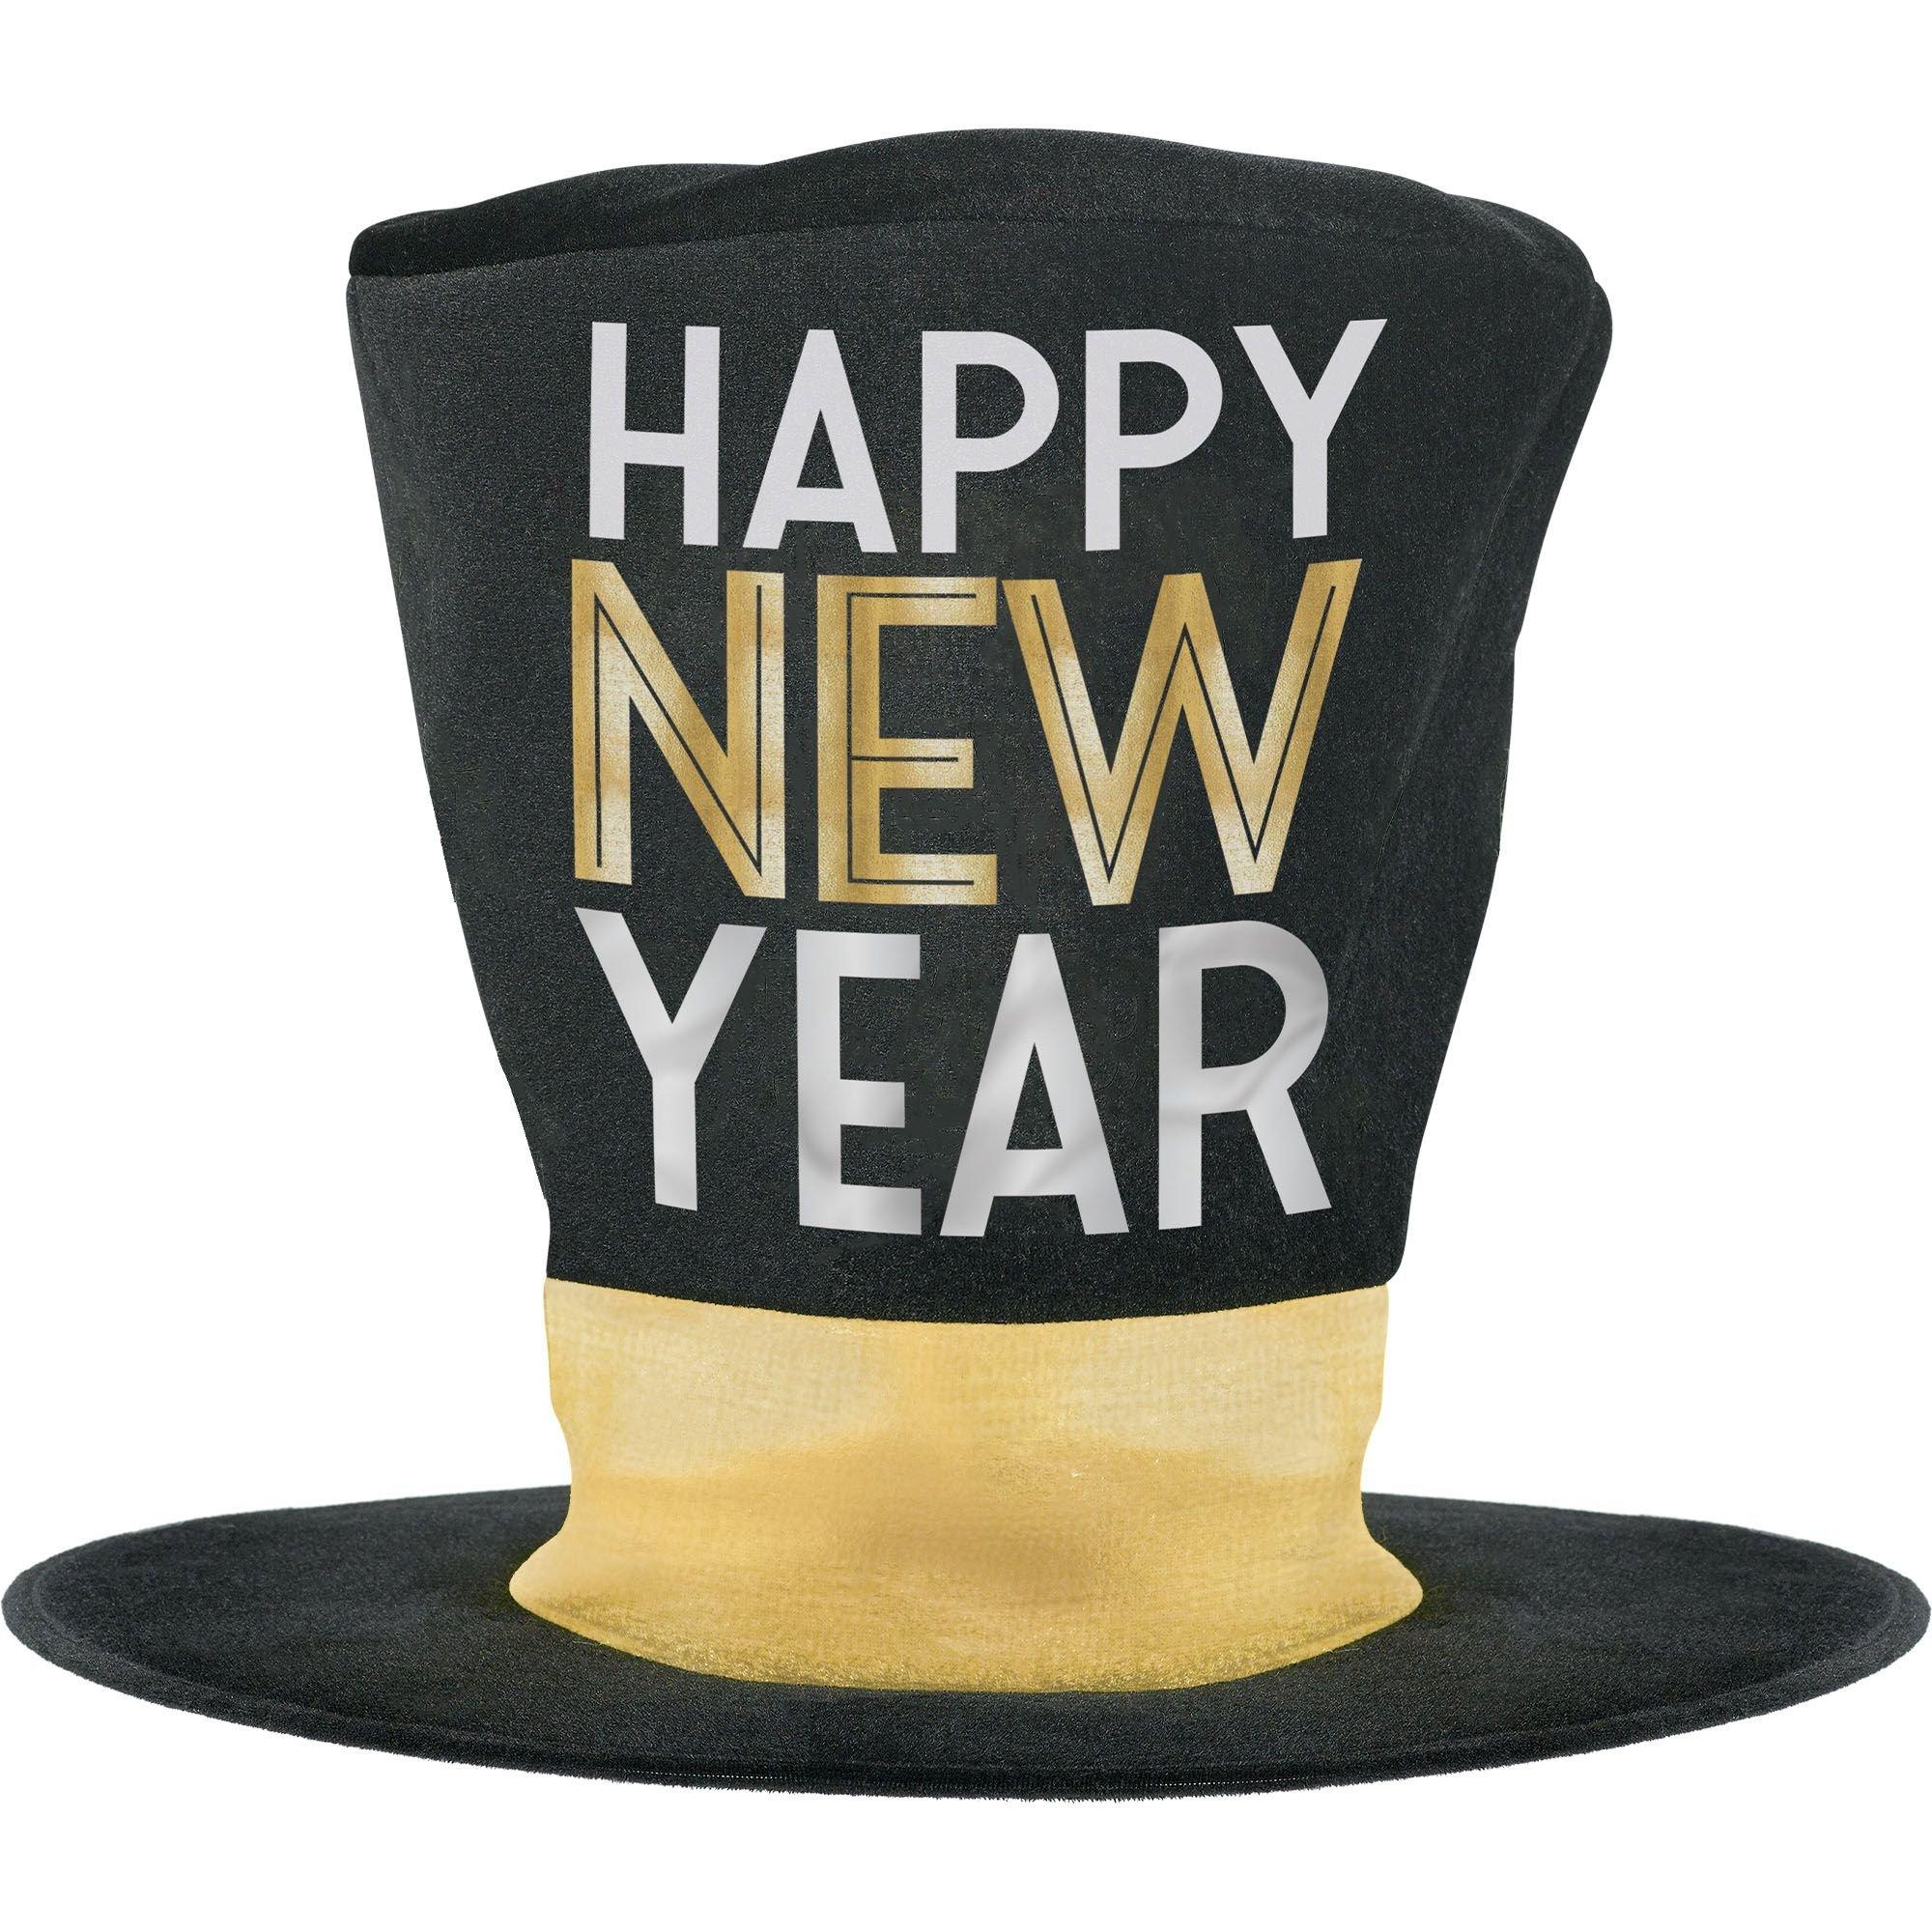 Oversized Black & Gold New Year's Fabric Top Hat Party City